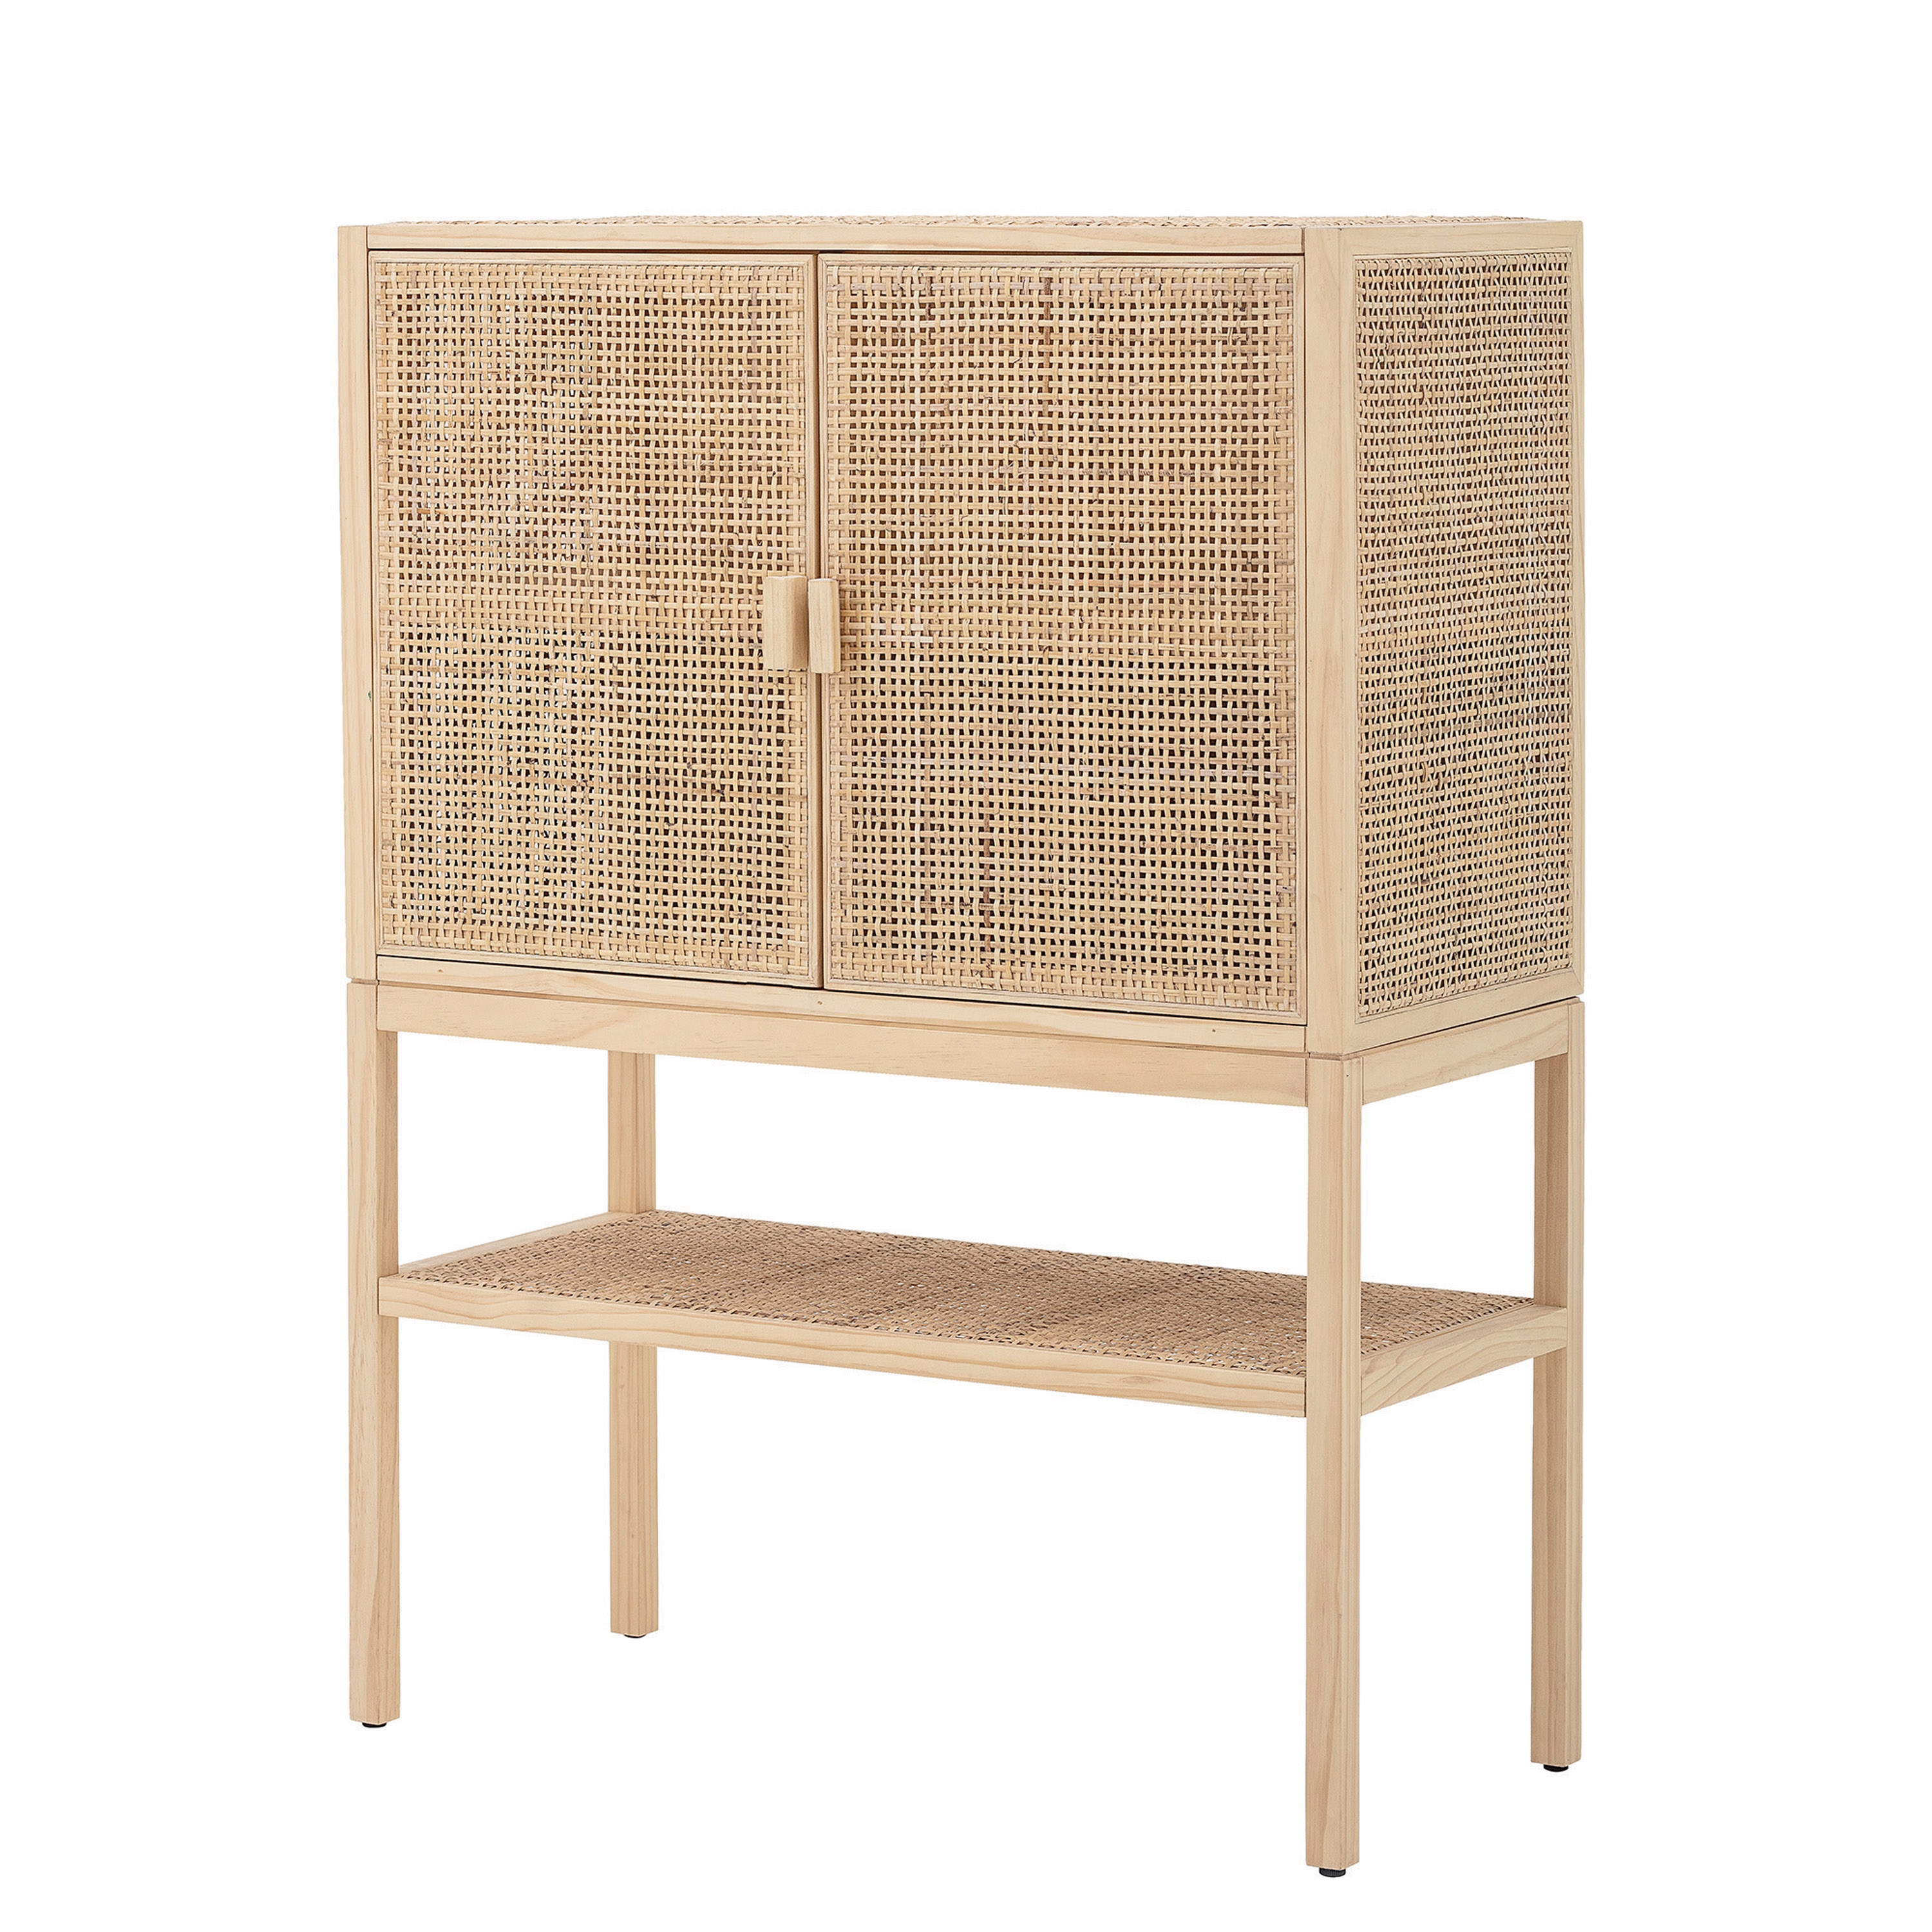 48"H Woven Rattan & Pine Wood Cabinet with 3 Shelves & 2 Doors - Image 0